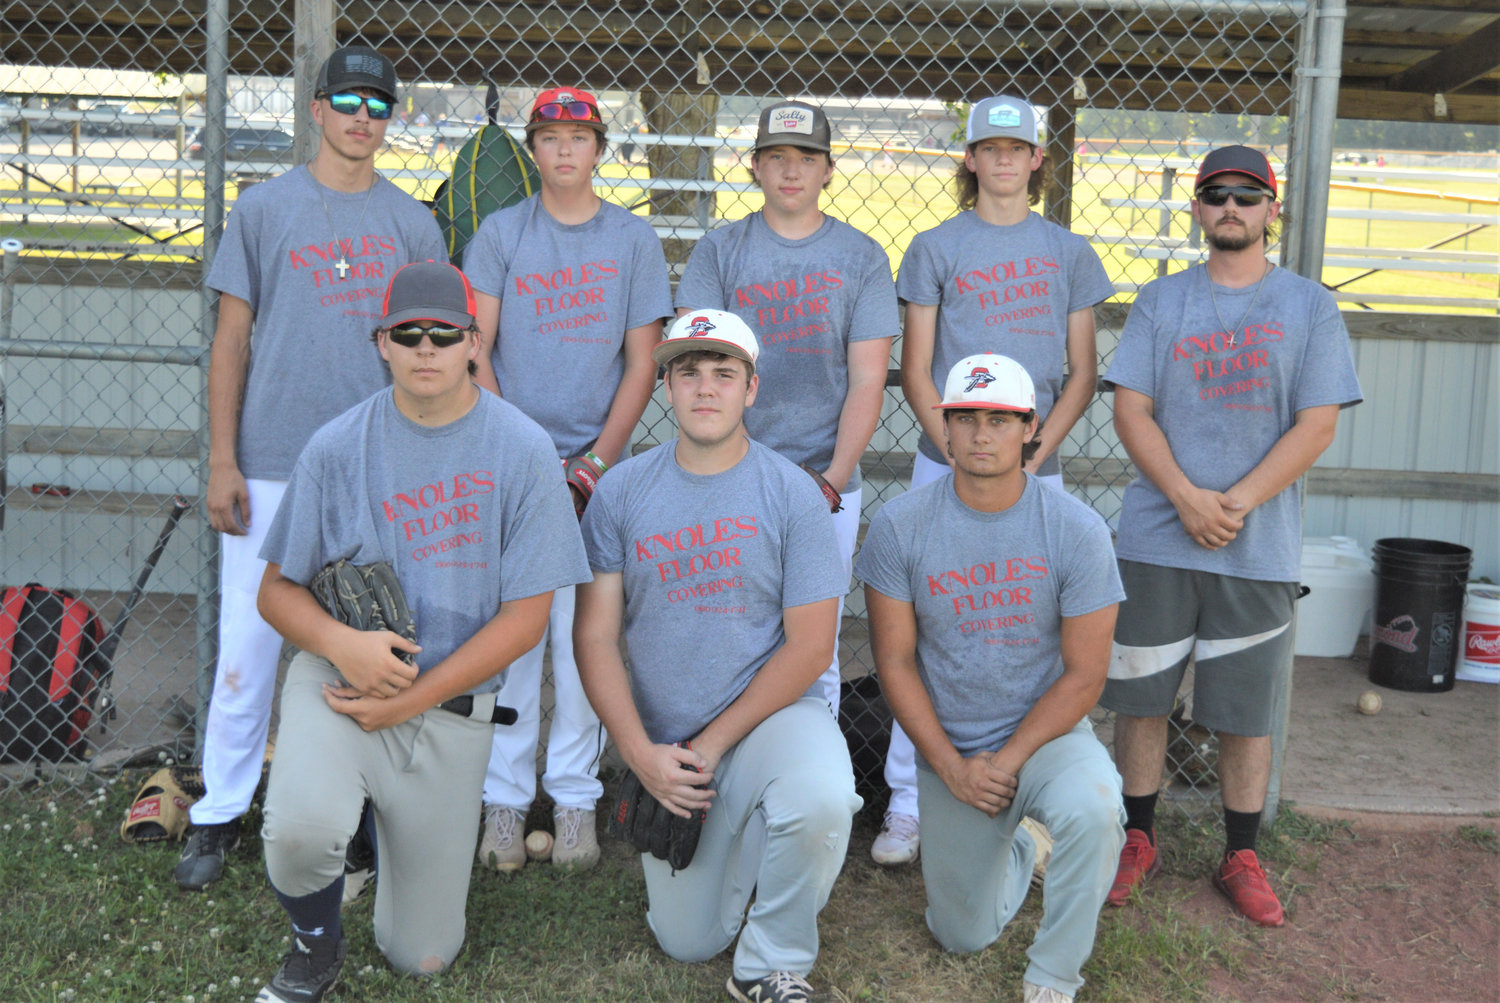 KNOLES FLOOR COVERING Roster: Bottom row (L to R): Justin Burke, Jackson Brown, and Garrett Swift. Top row: Caleb Eaton, Chancey Whitworth, Corbin Dody, Jake Mendenhall, and Coach Lane Knoles. Not pictured: Jonah Kopriva, Skylar Wohlers, and Wyatt Dills.